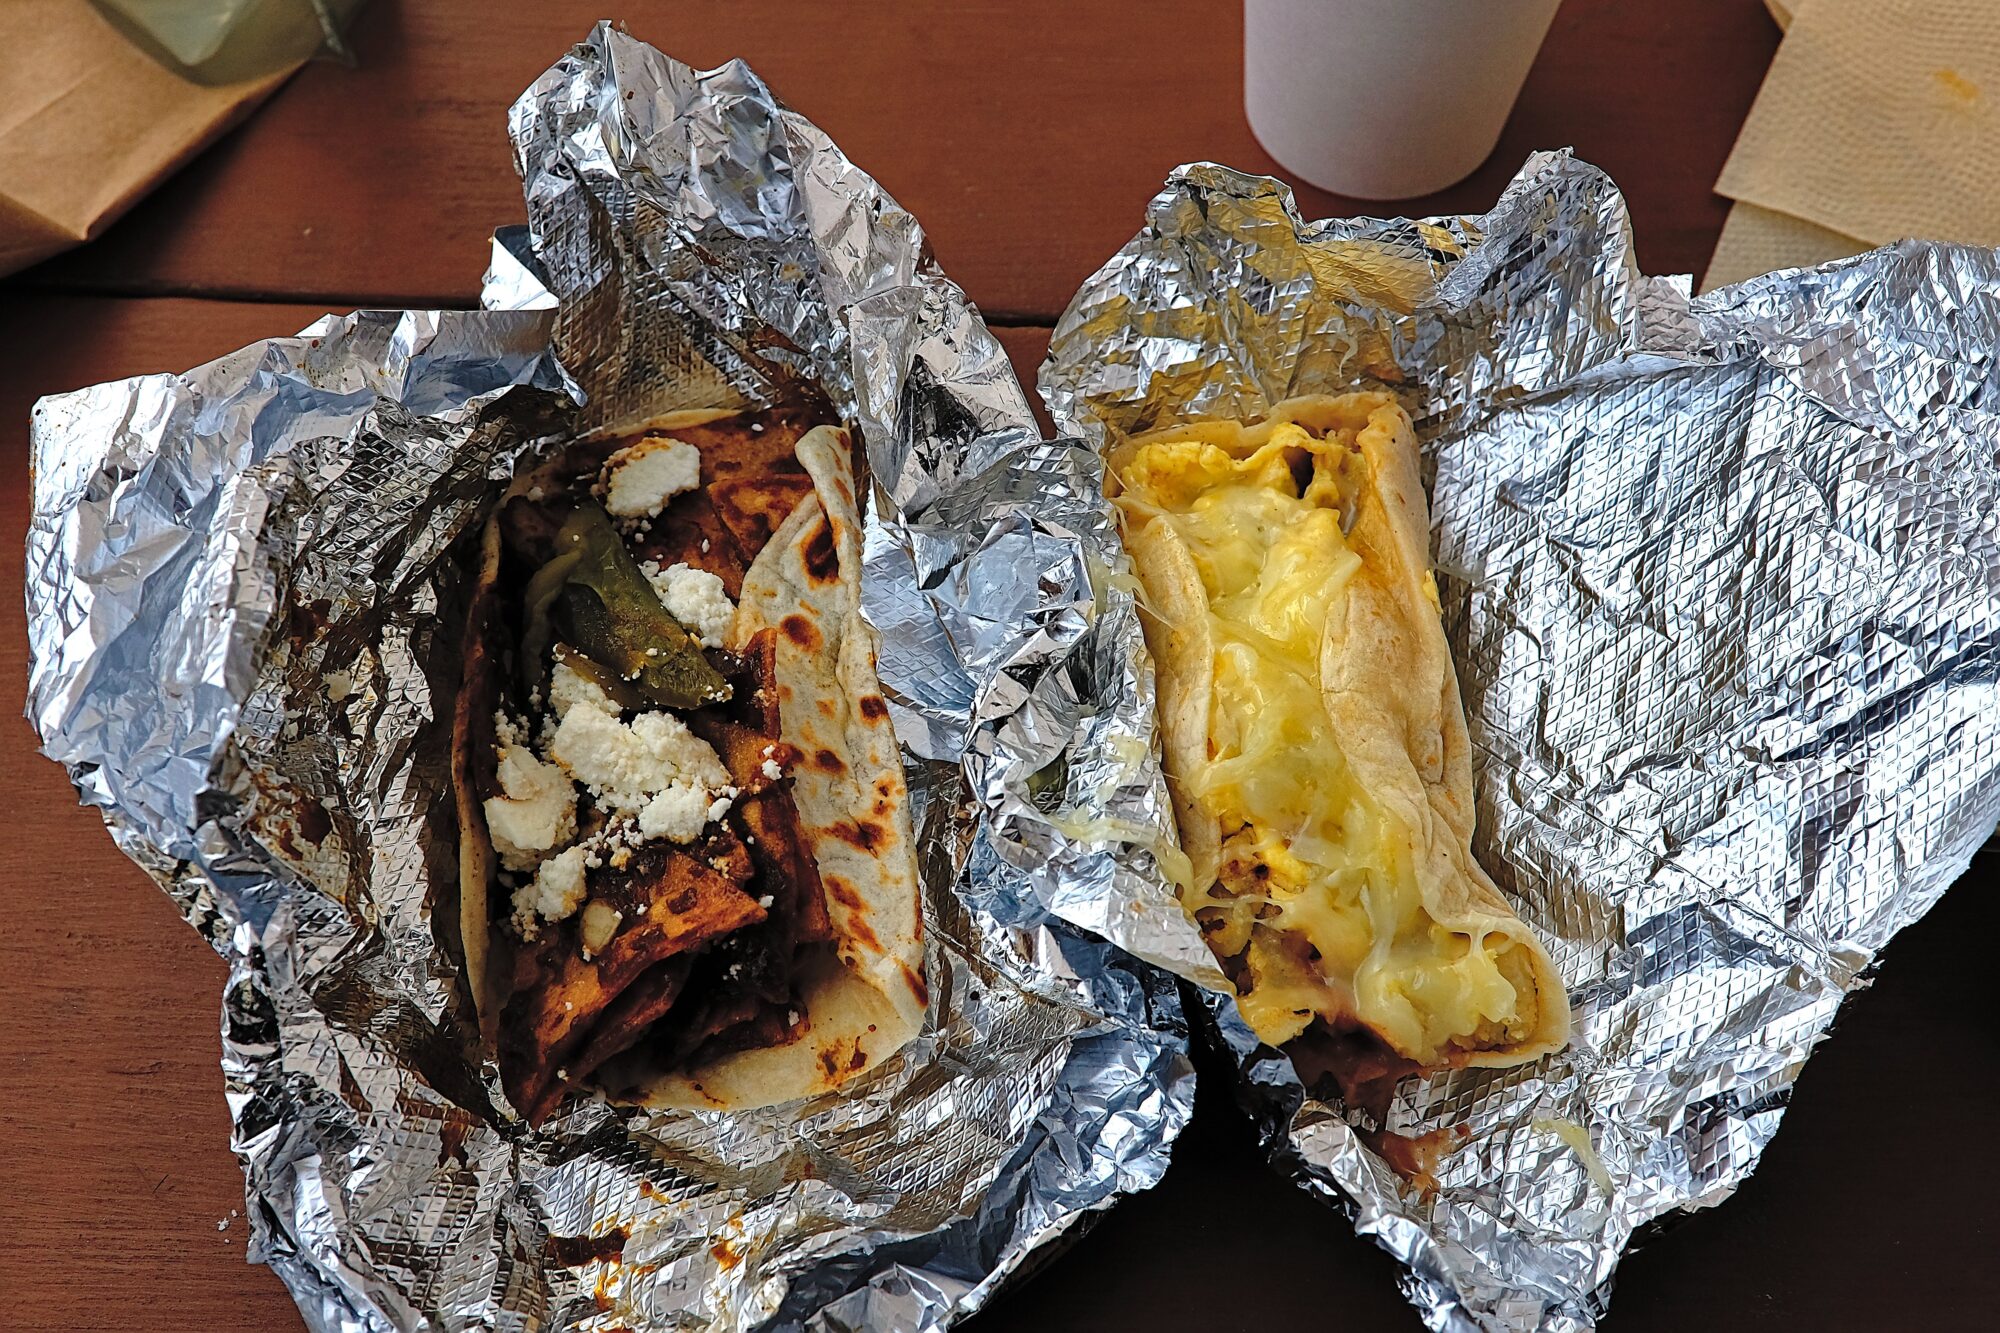 Two breakfast tacos in foil wrappers